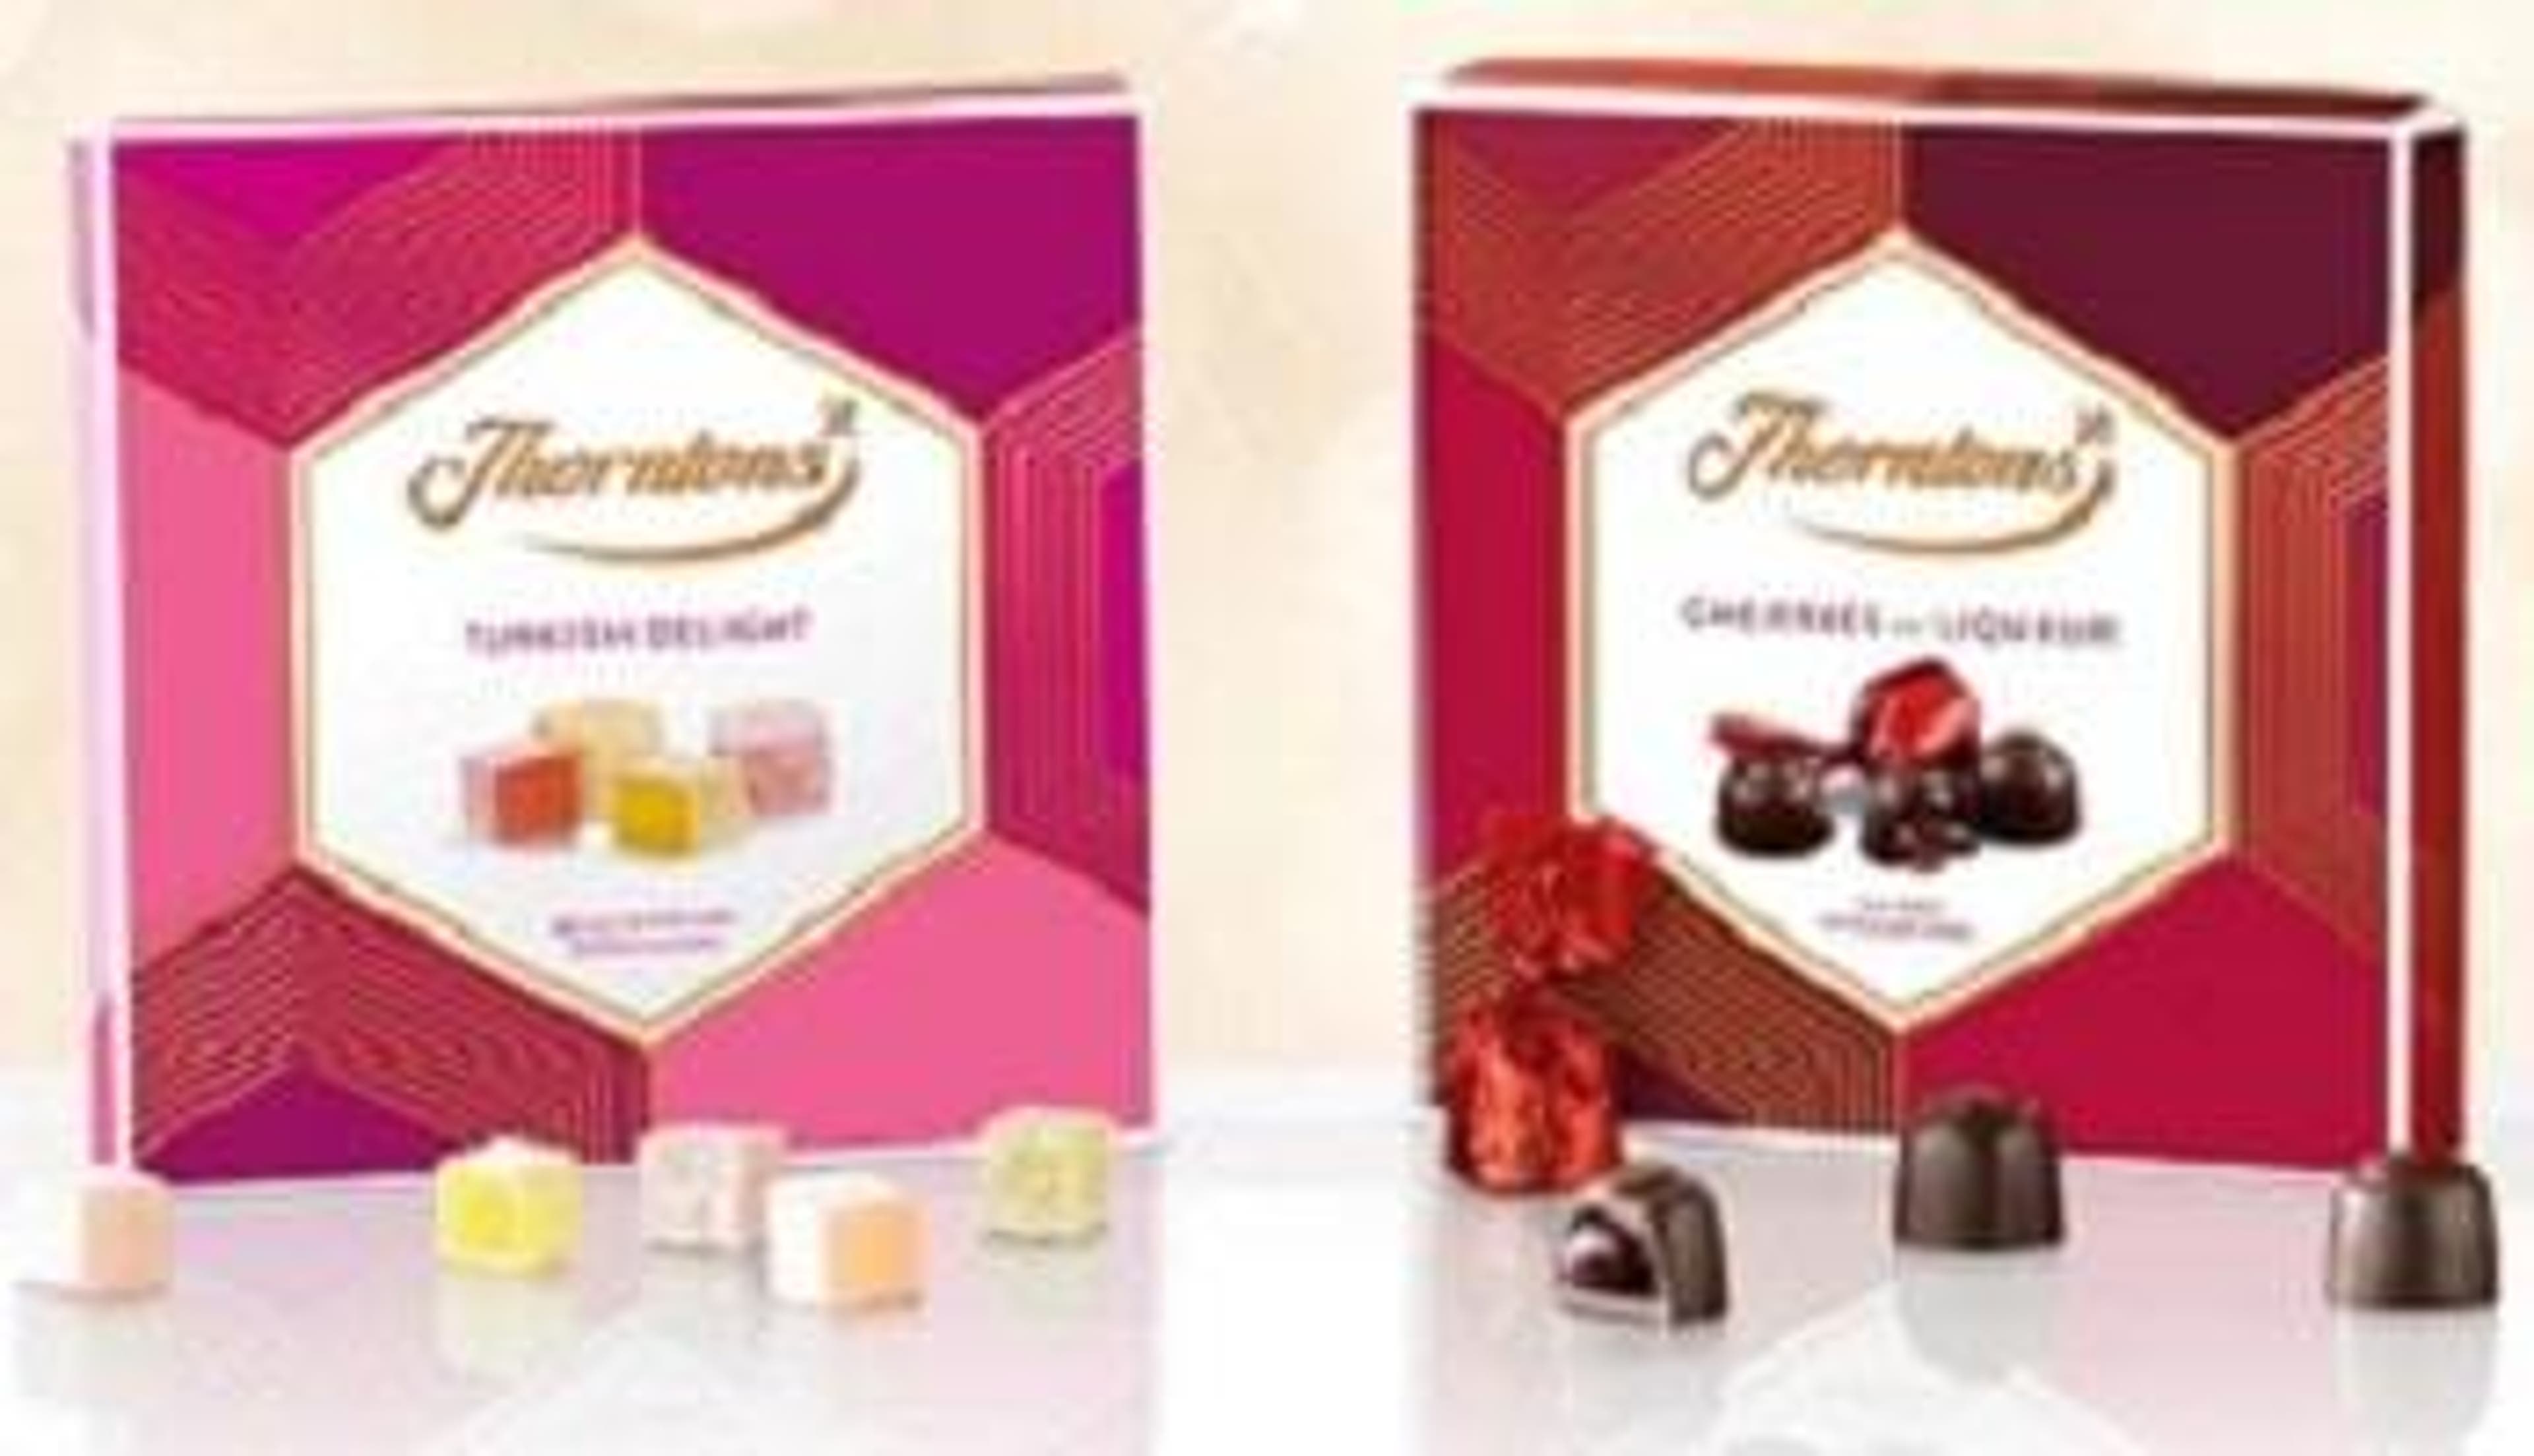  A box of Thonrtons Chocolate Liqueurs next to a box of Thorntons Turkish Delight 